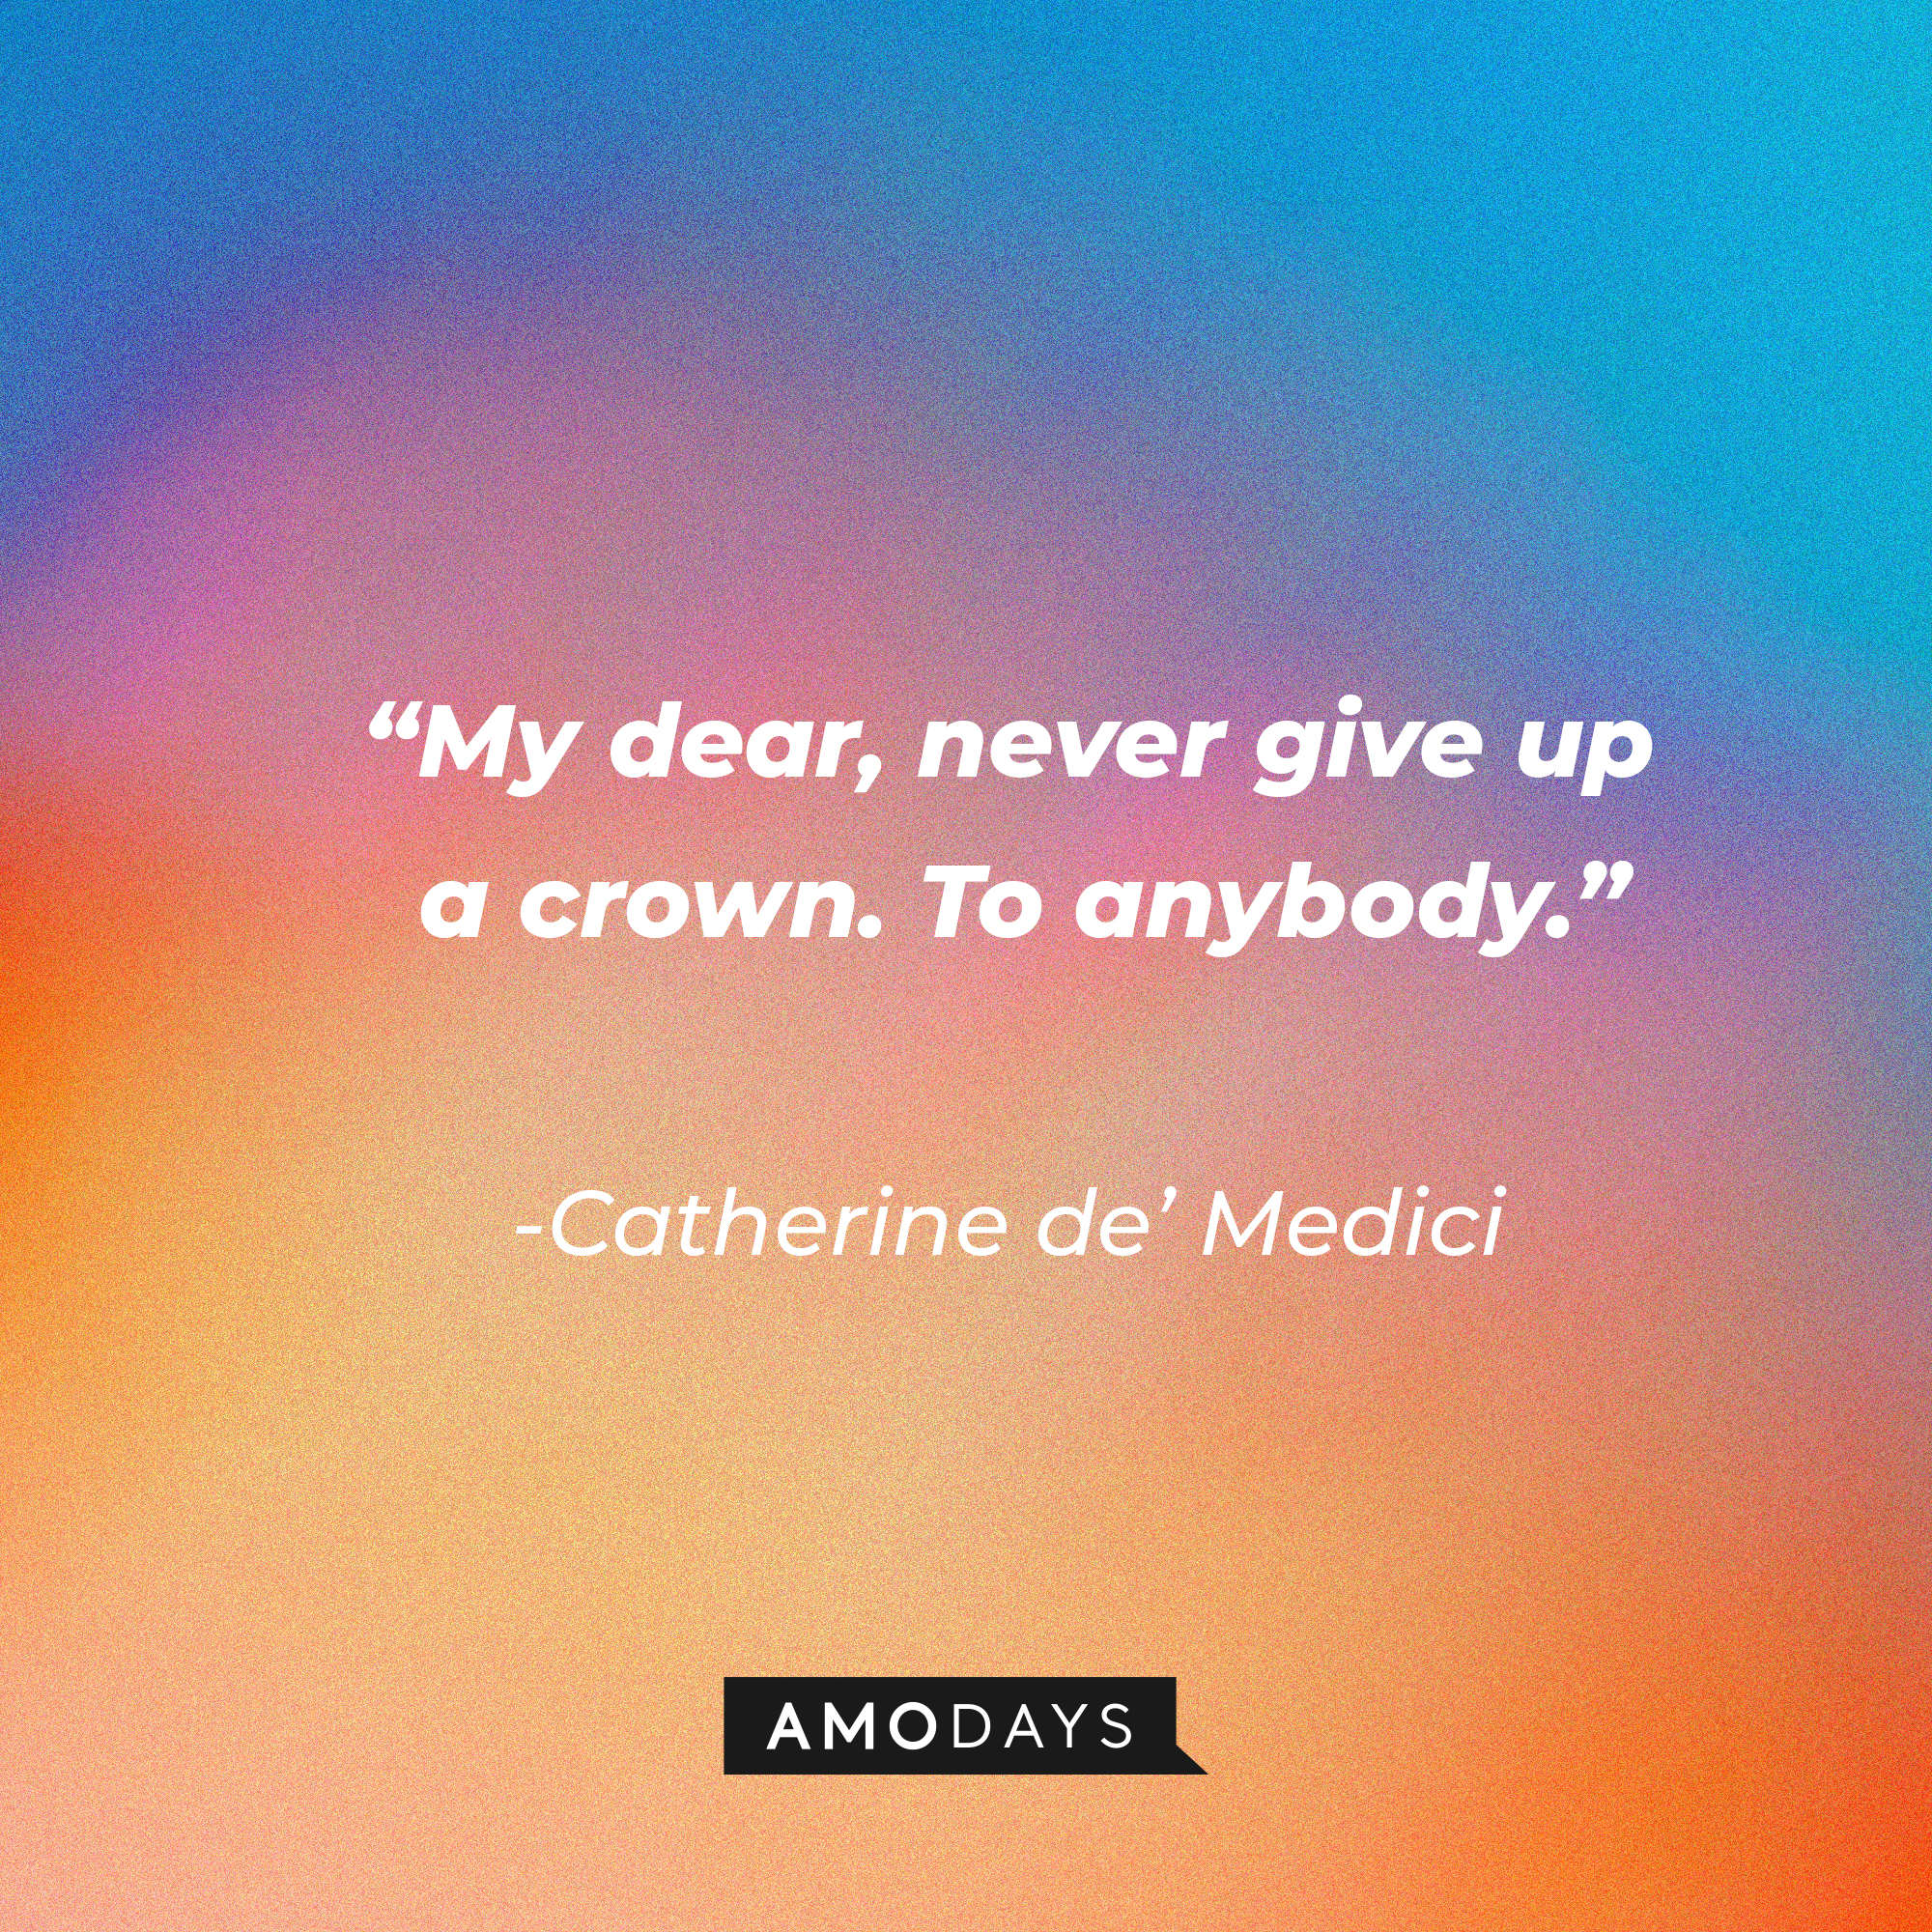 Catherine de’ Medici's quote in "Reign:" “My dear, never give up a crown. To anybody.” | Source: Amodays